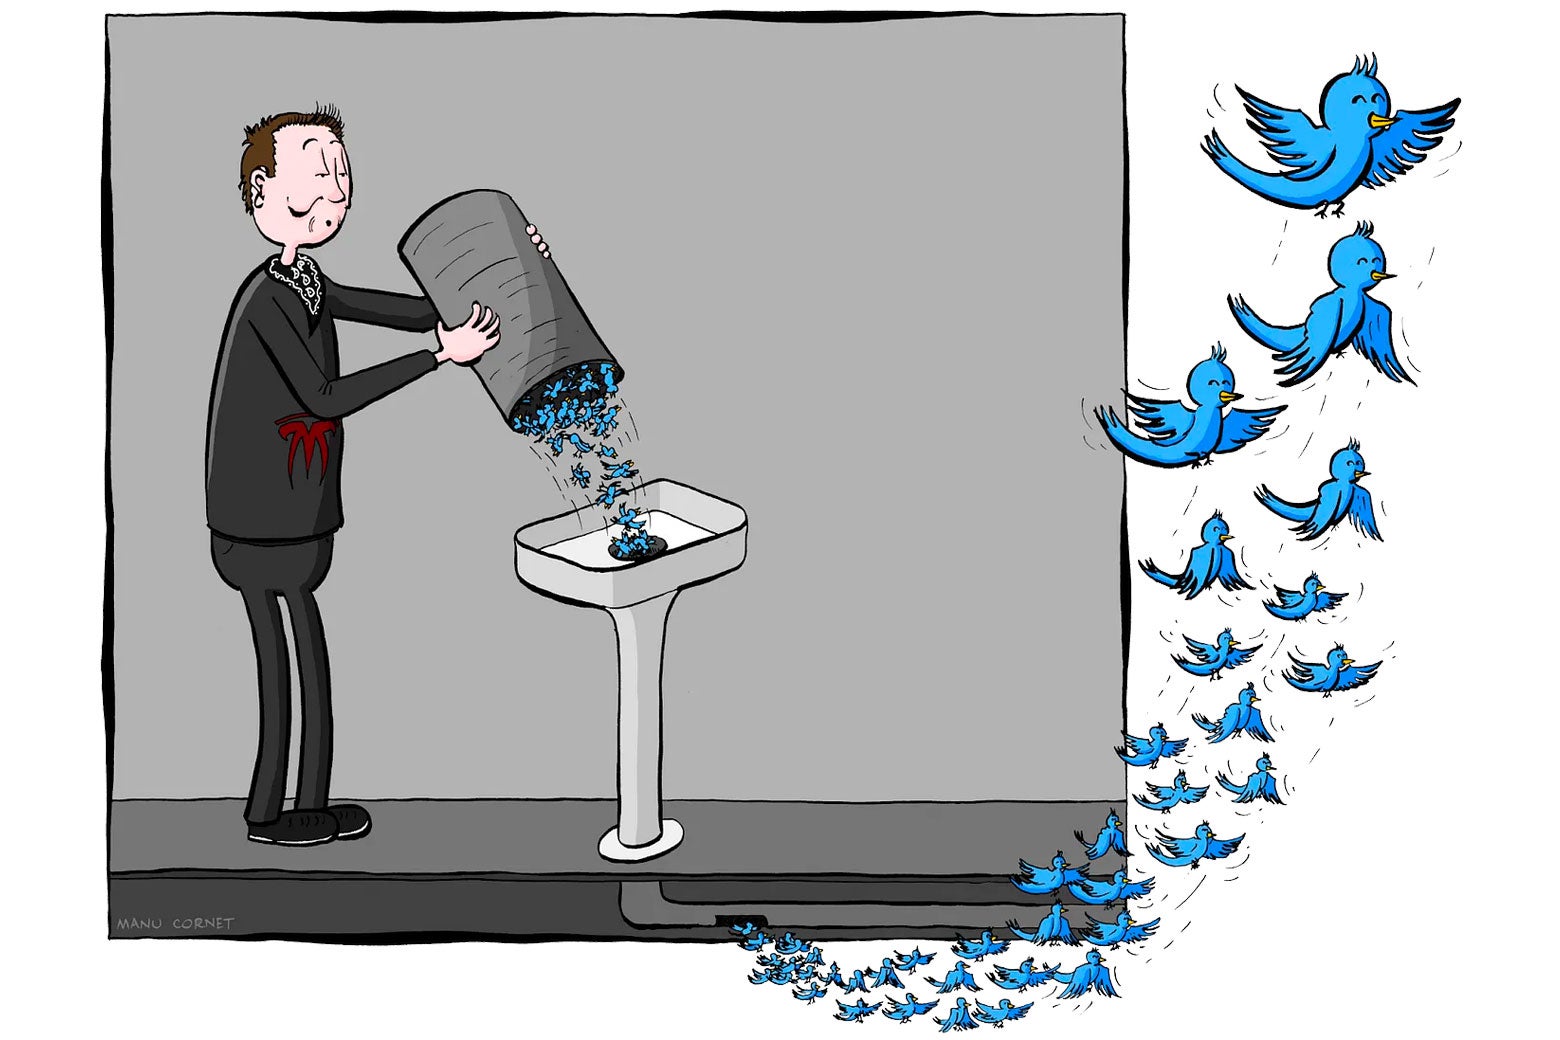 Musk dumping Twitter employees down a sink; they emerge free as a bird.